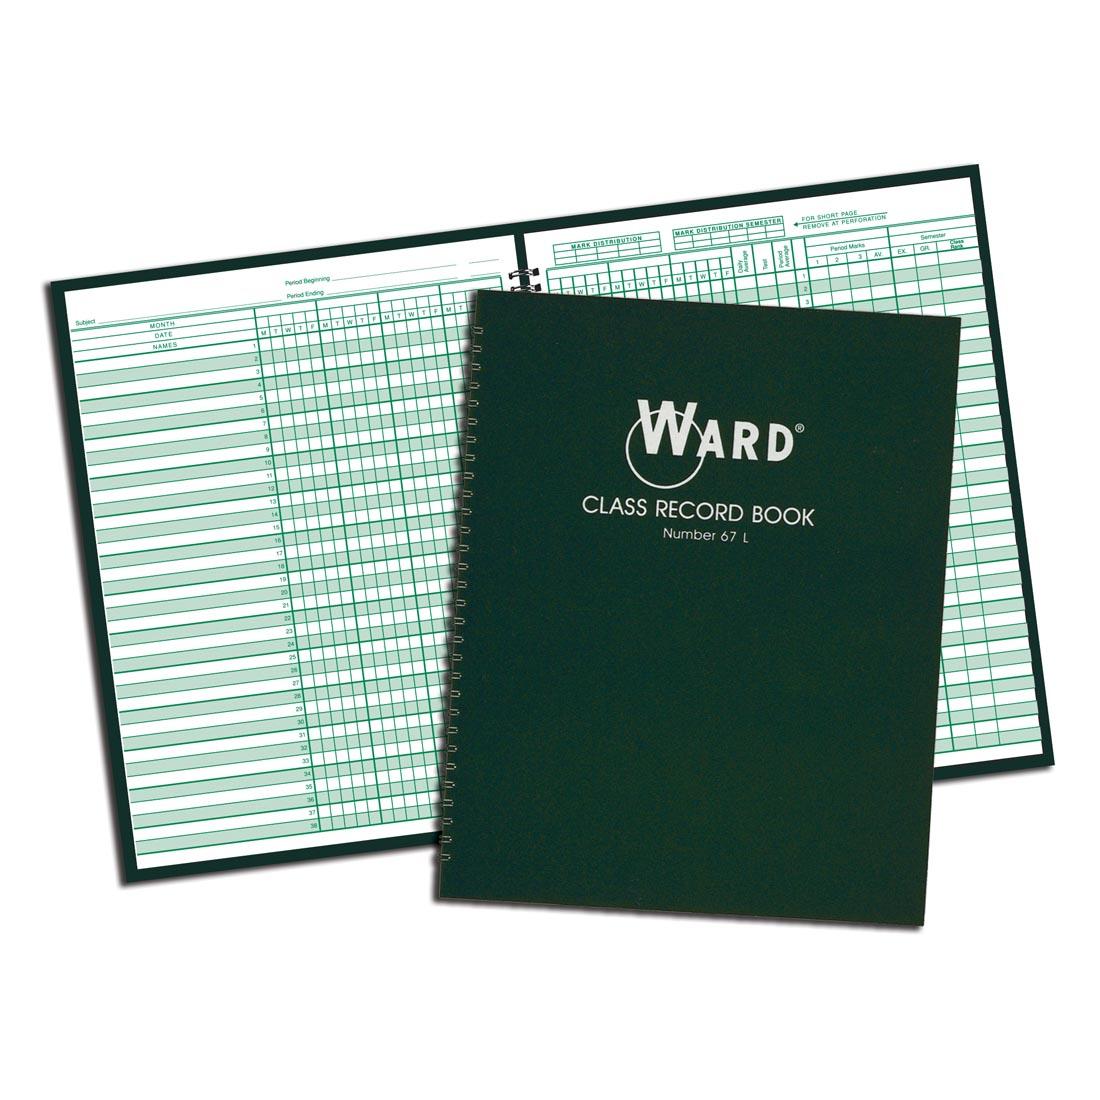 Ward Class Record Book, for 6-7 Week Grading Periods, shown both open and closed